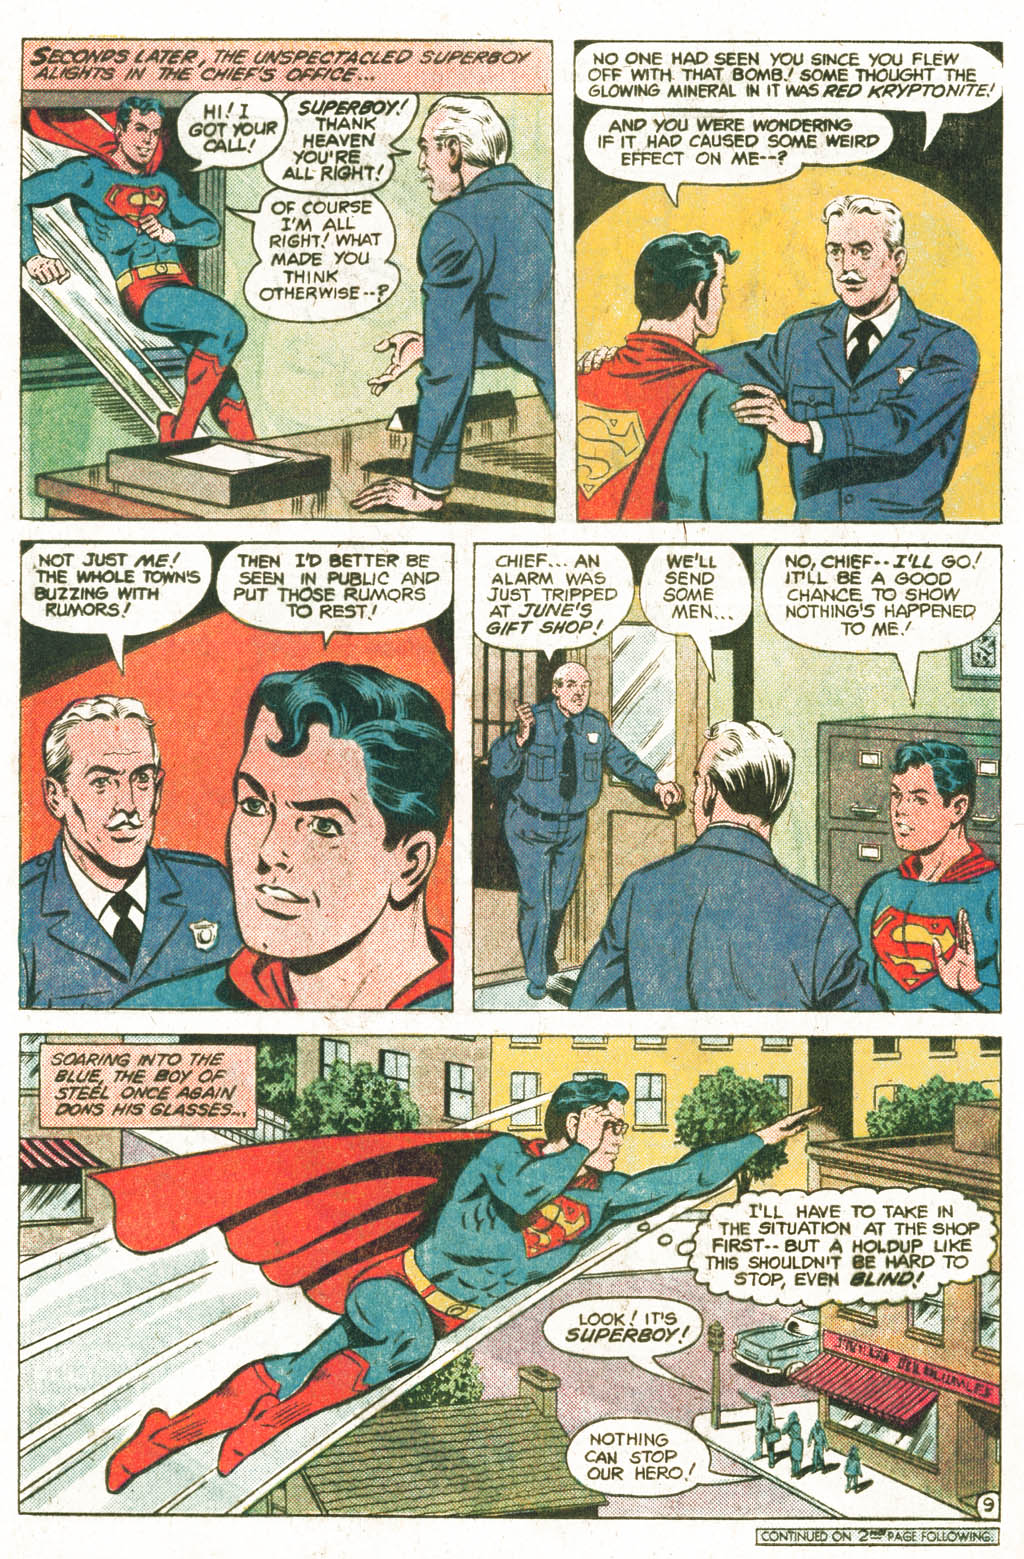 The New Adventures of Superboy 24 Page 9